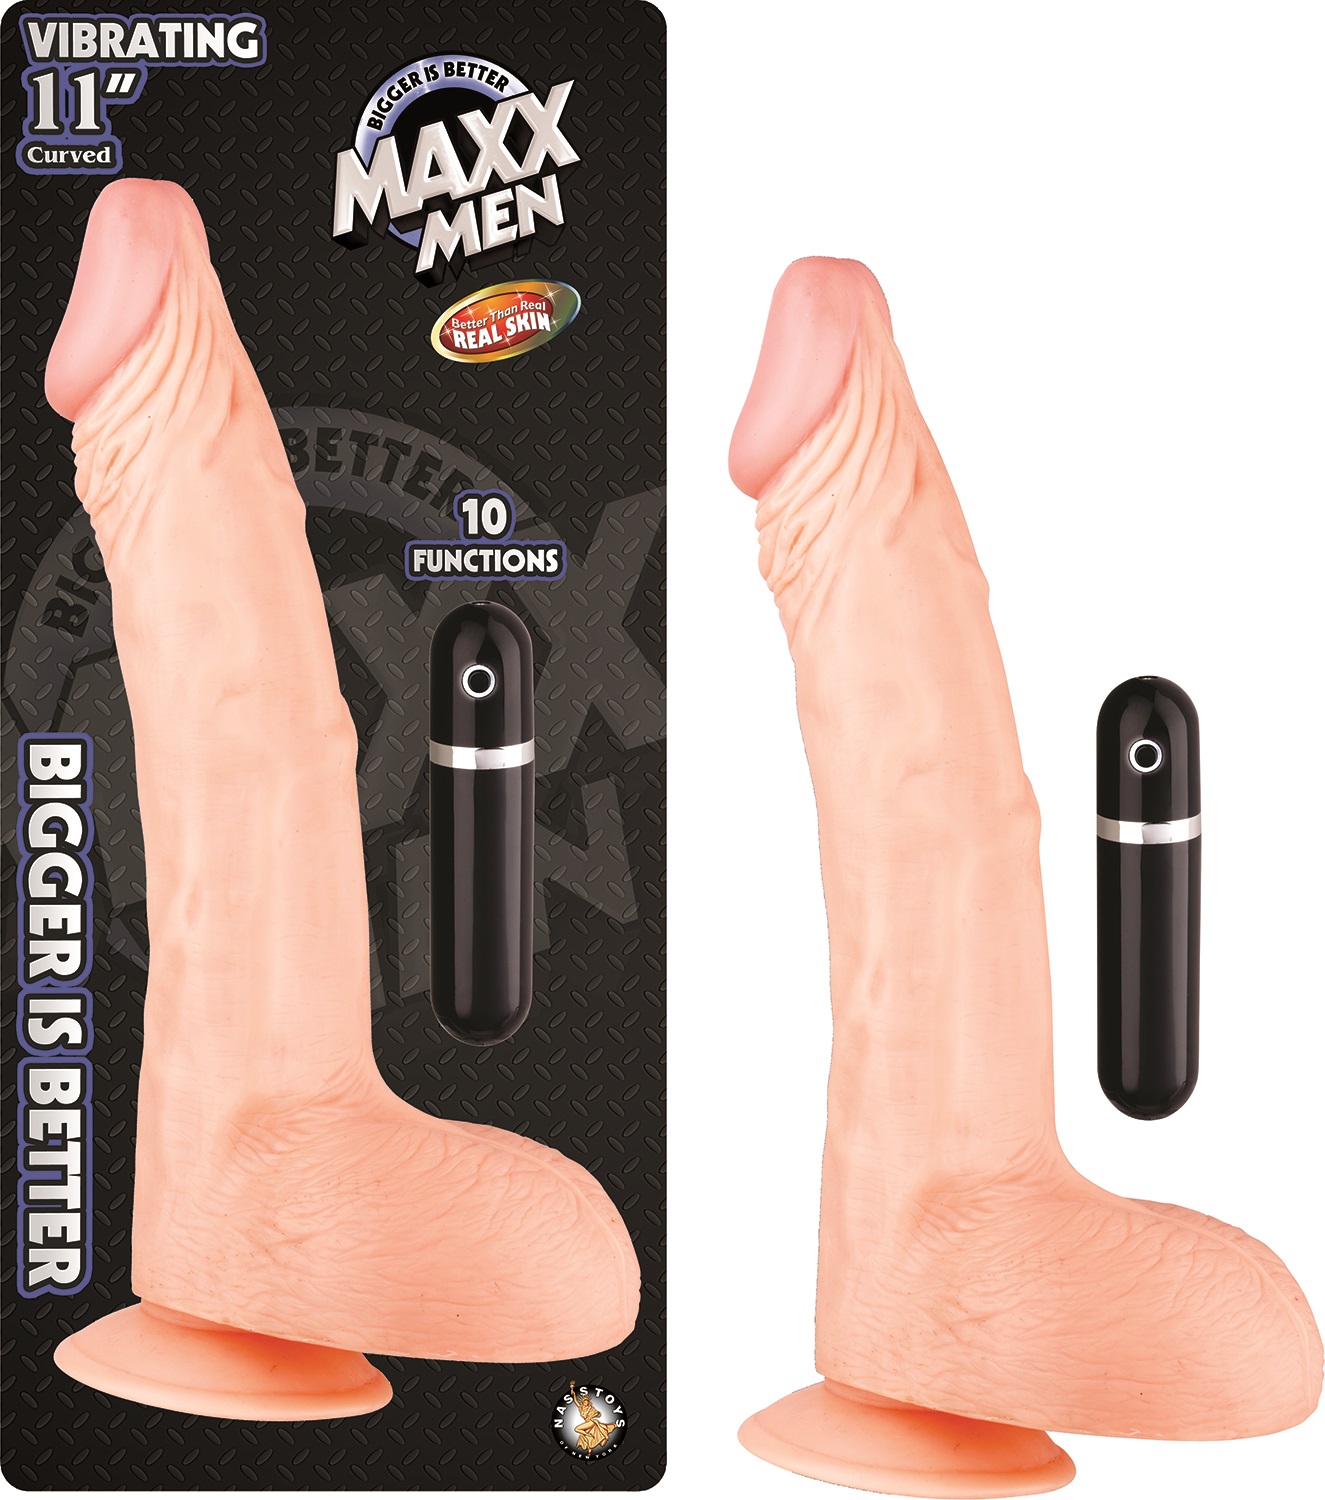 Maxx+Men+Curved+Vibrating+Dong+11+Inch